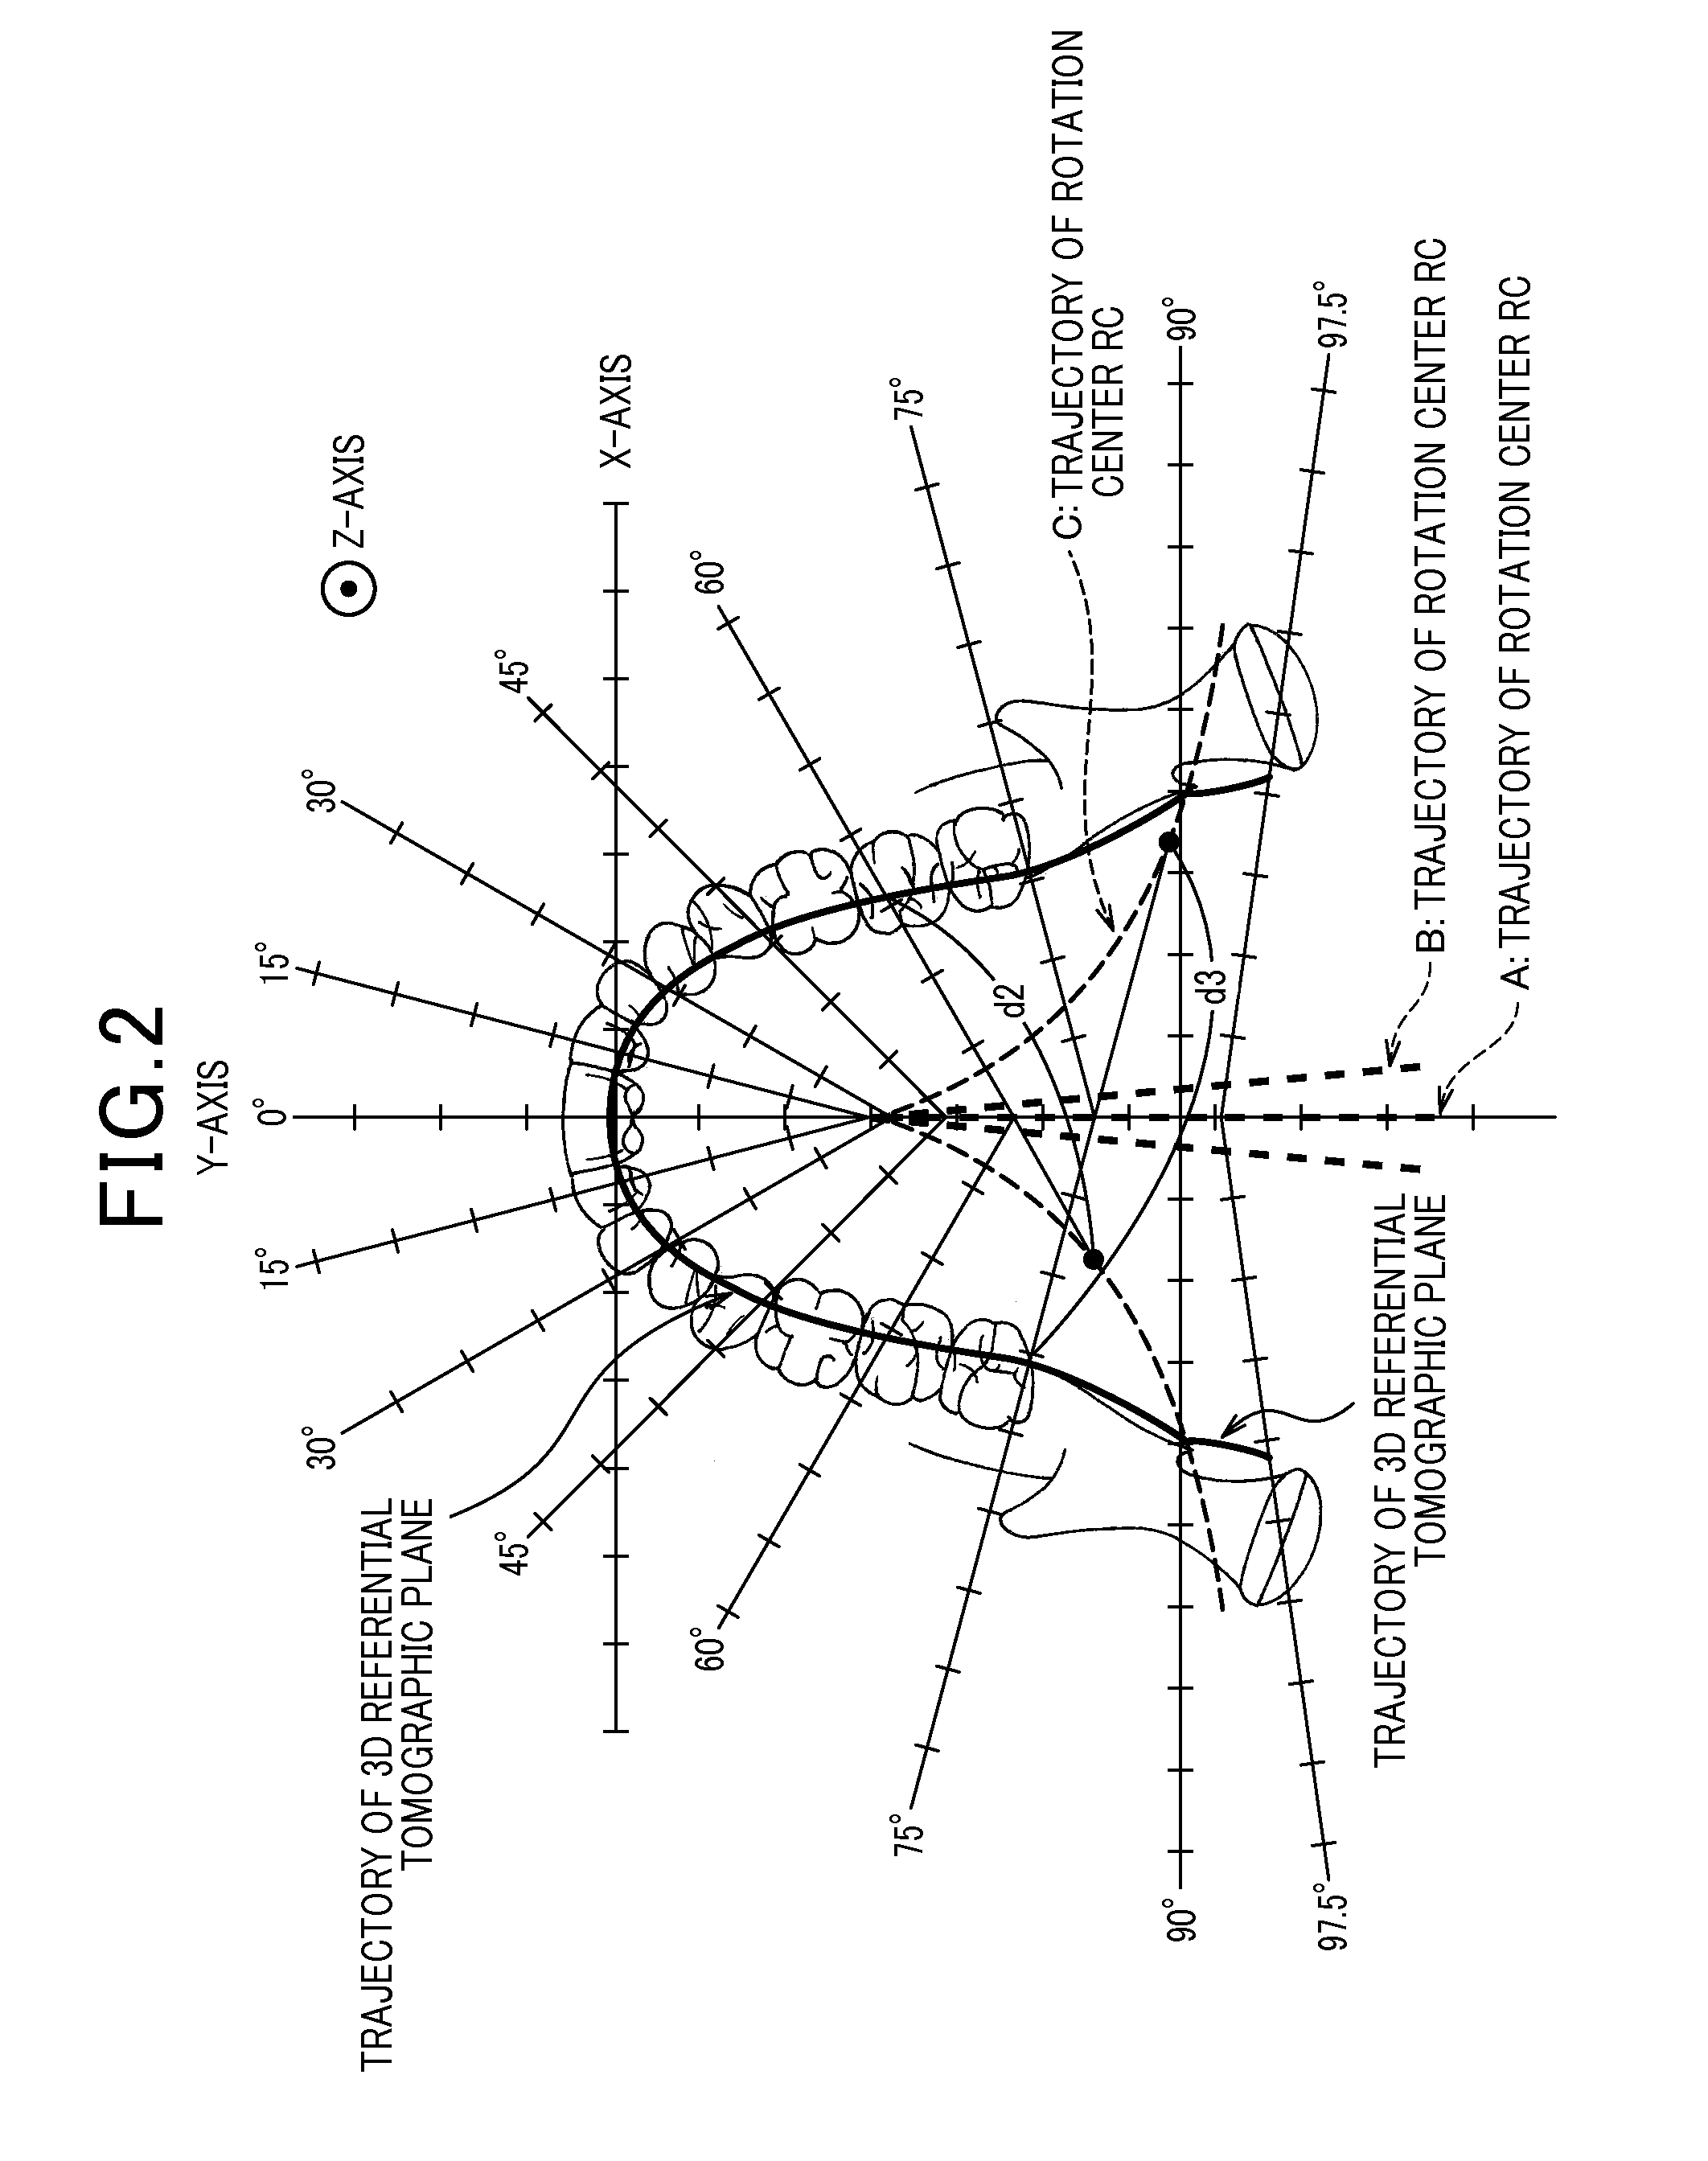 Radiation imaging apparatus and phantom used for the same